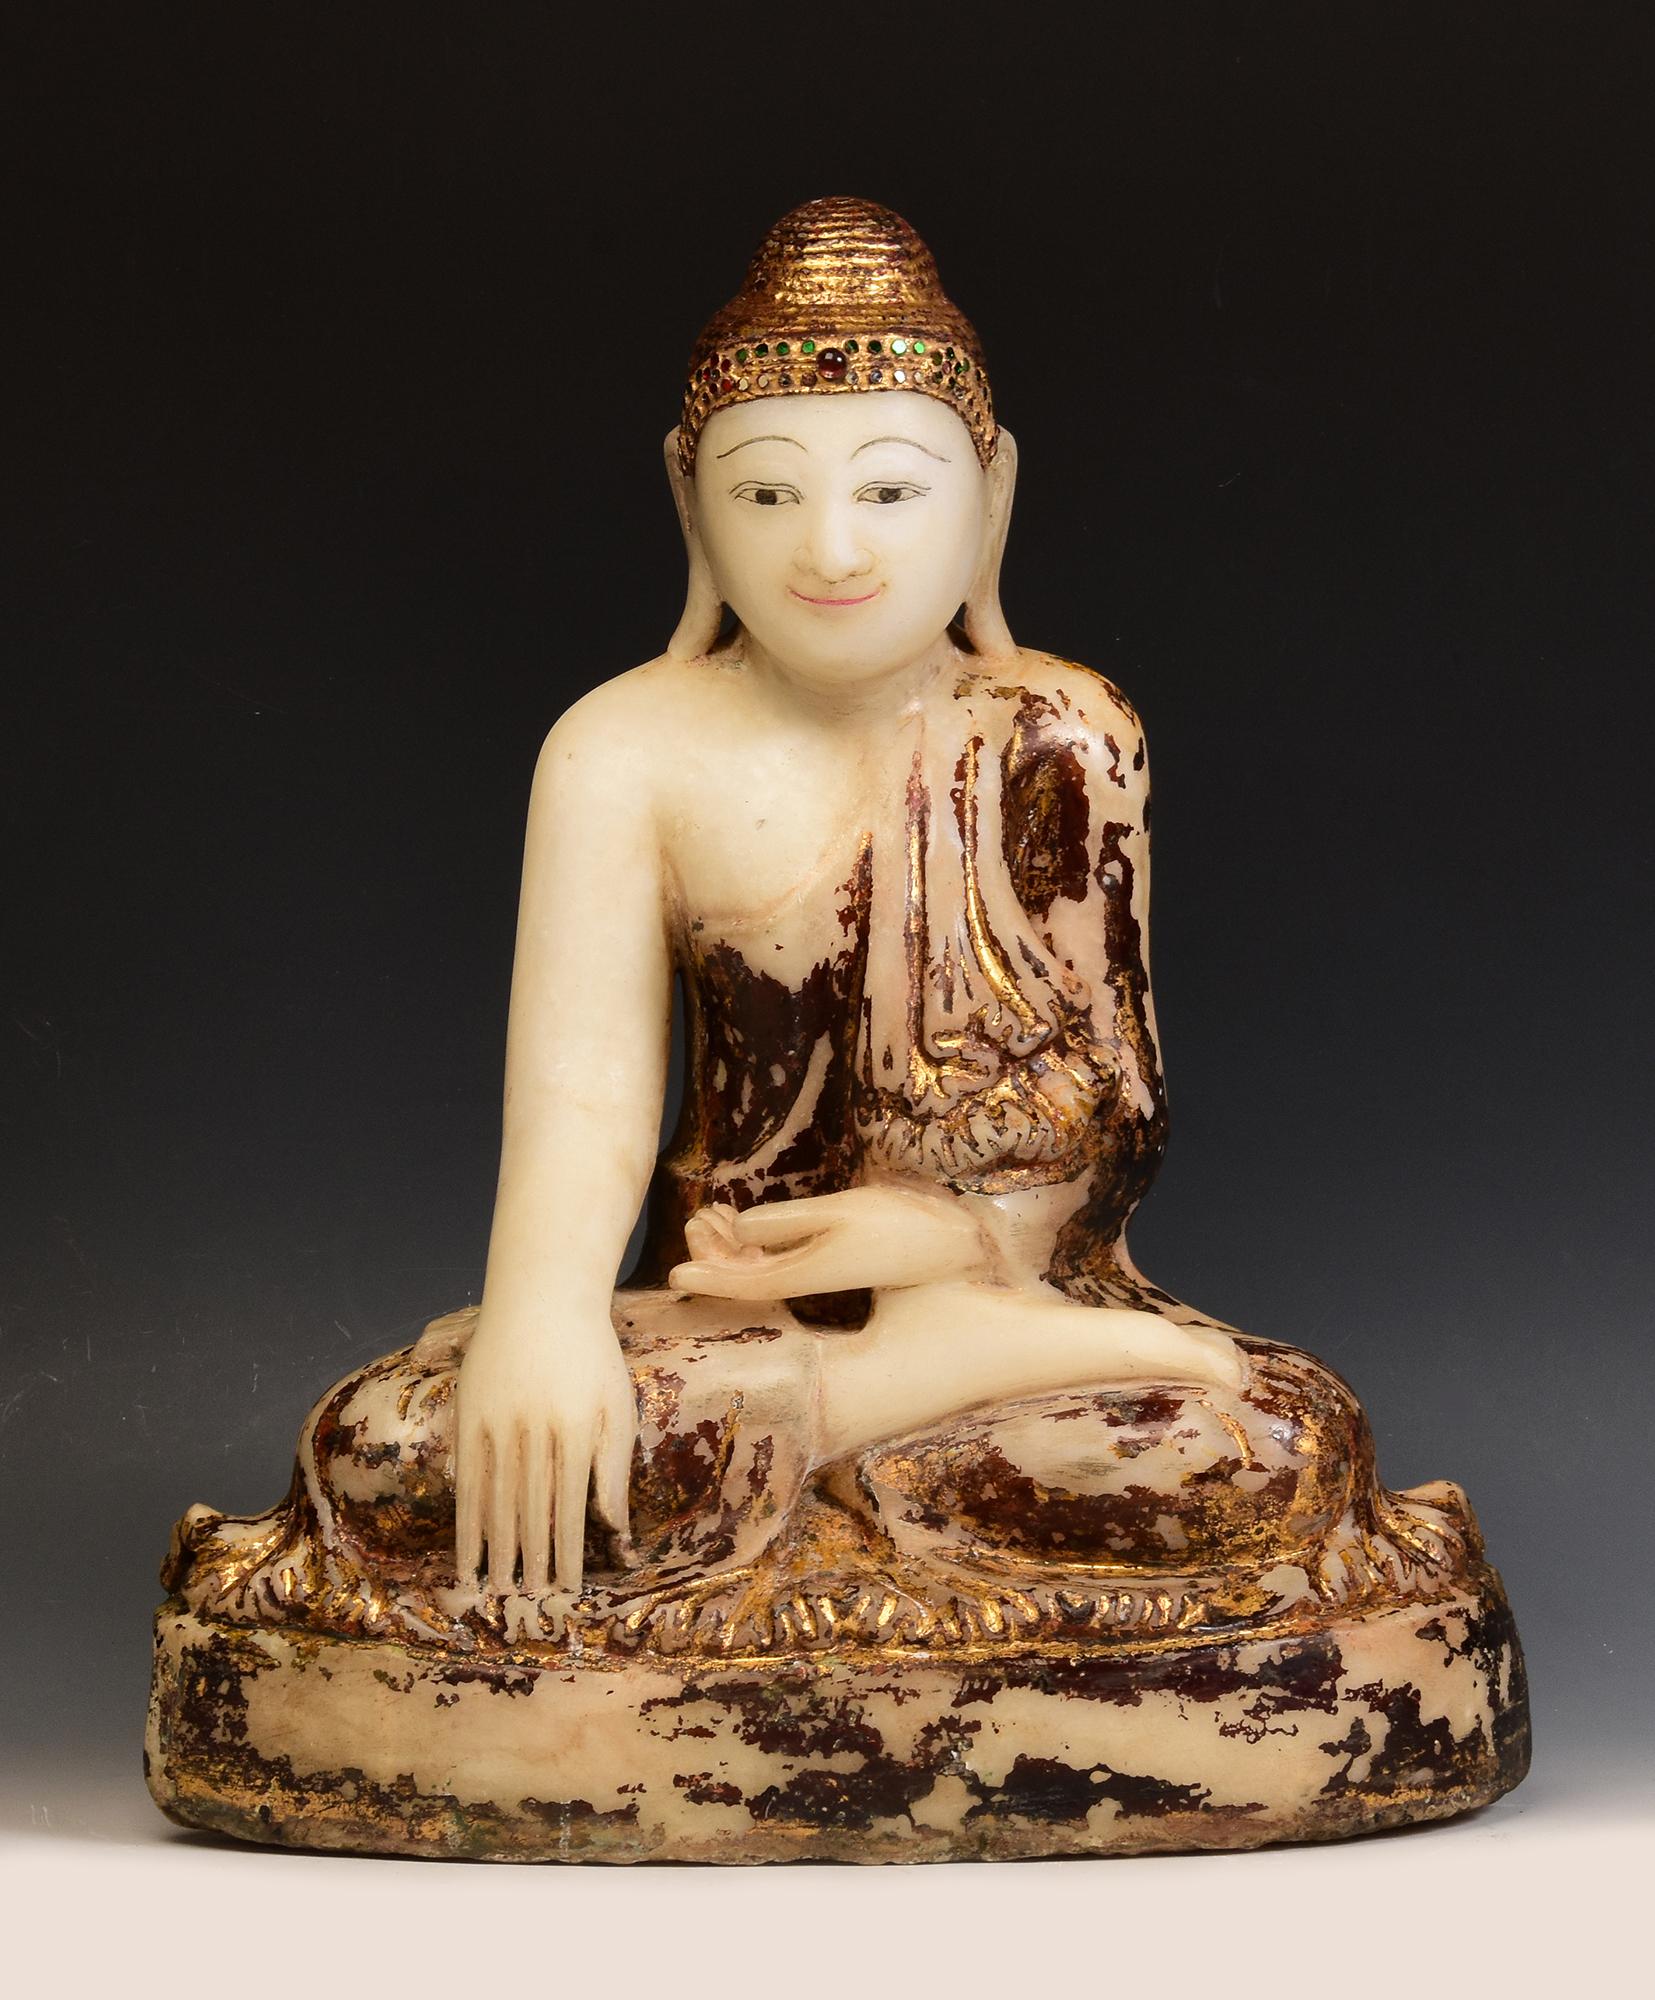 Antique Burmese alabaster Buddha sitting in Mara Vijaya (calling the earth to witness) posture on a base, with inlay of colorful glass pieces on the headband.

Age: Burma, Mandalay Period, 19th Century
Size: Height 44.5 C.M. / Width 37 C.M. / Depth